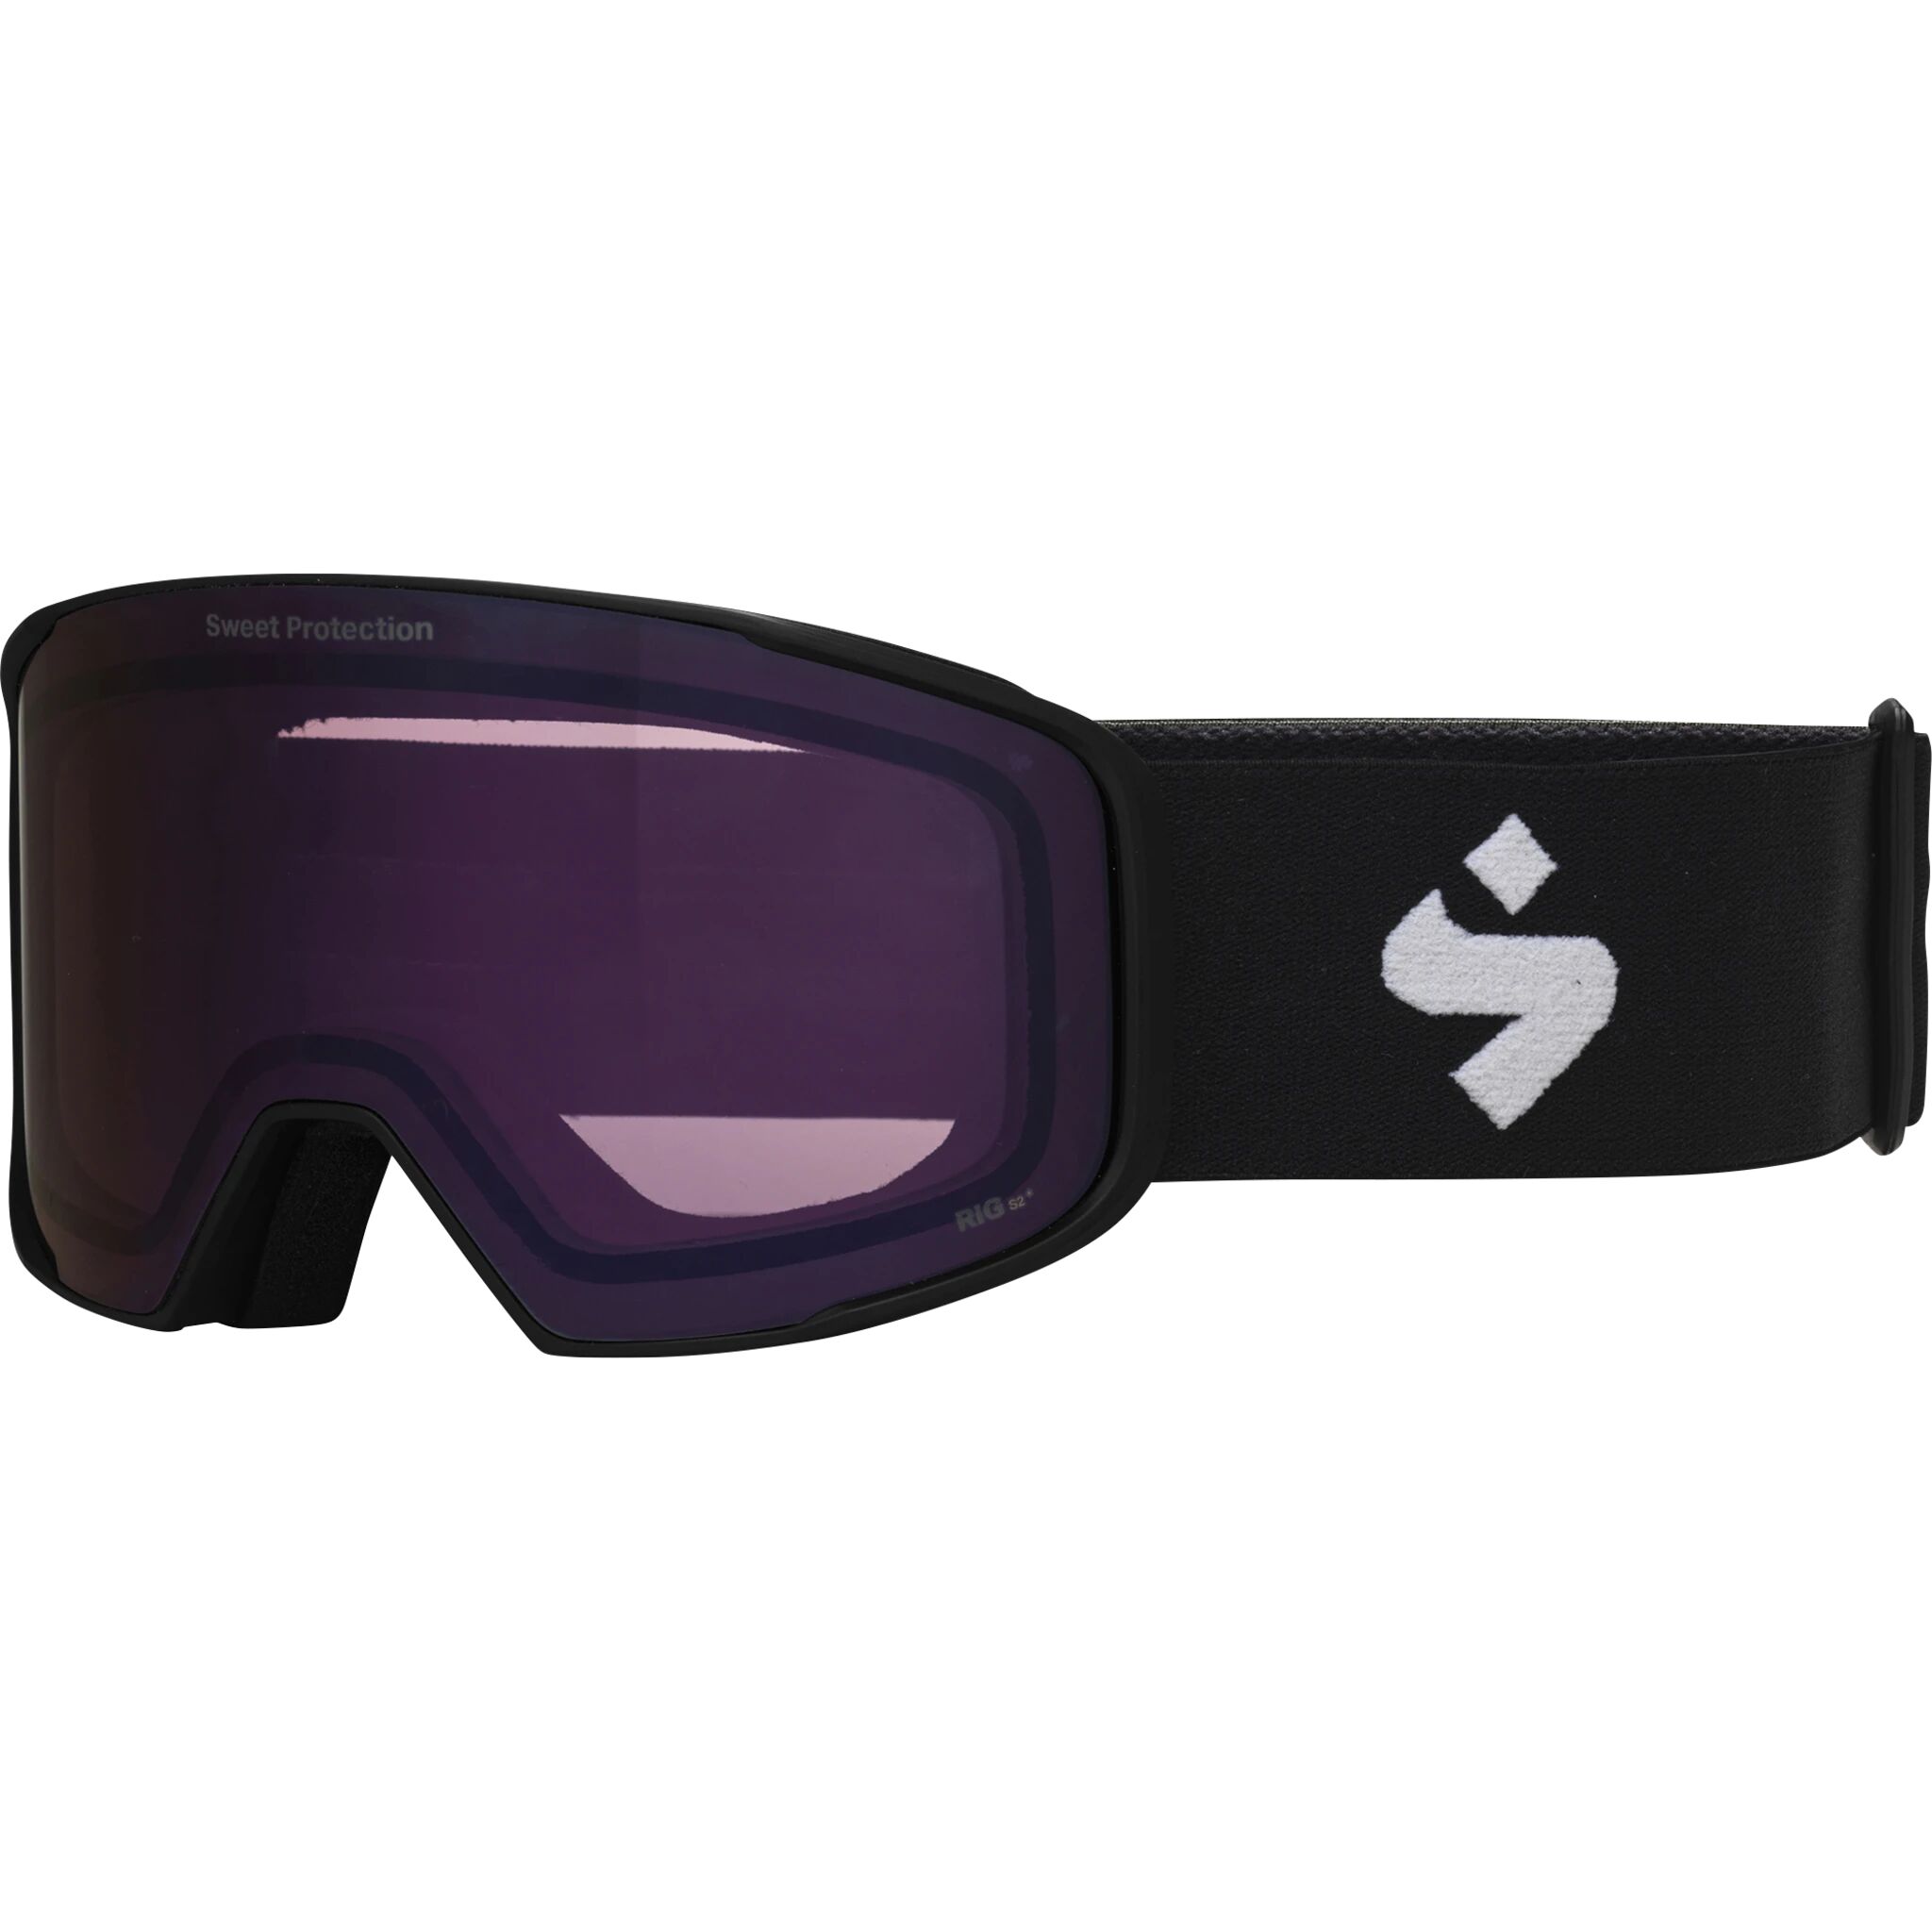 Sweet Protection Goggles Boondock RIG 21/22, alpinbrille senior One Size RIG Light Amethyst/M